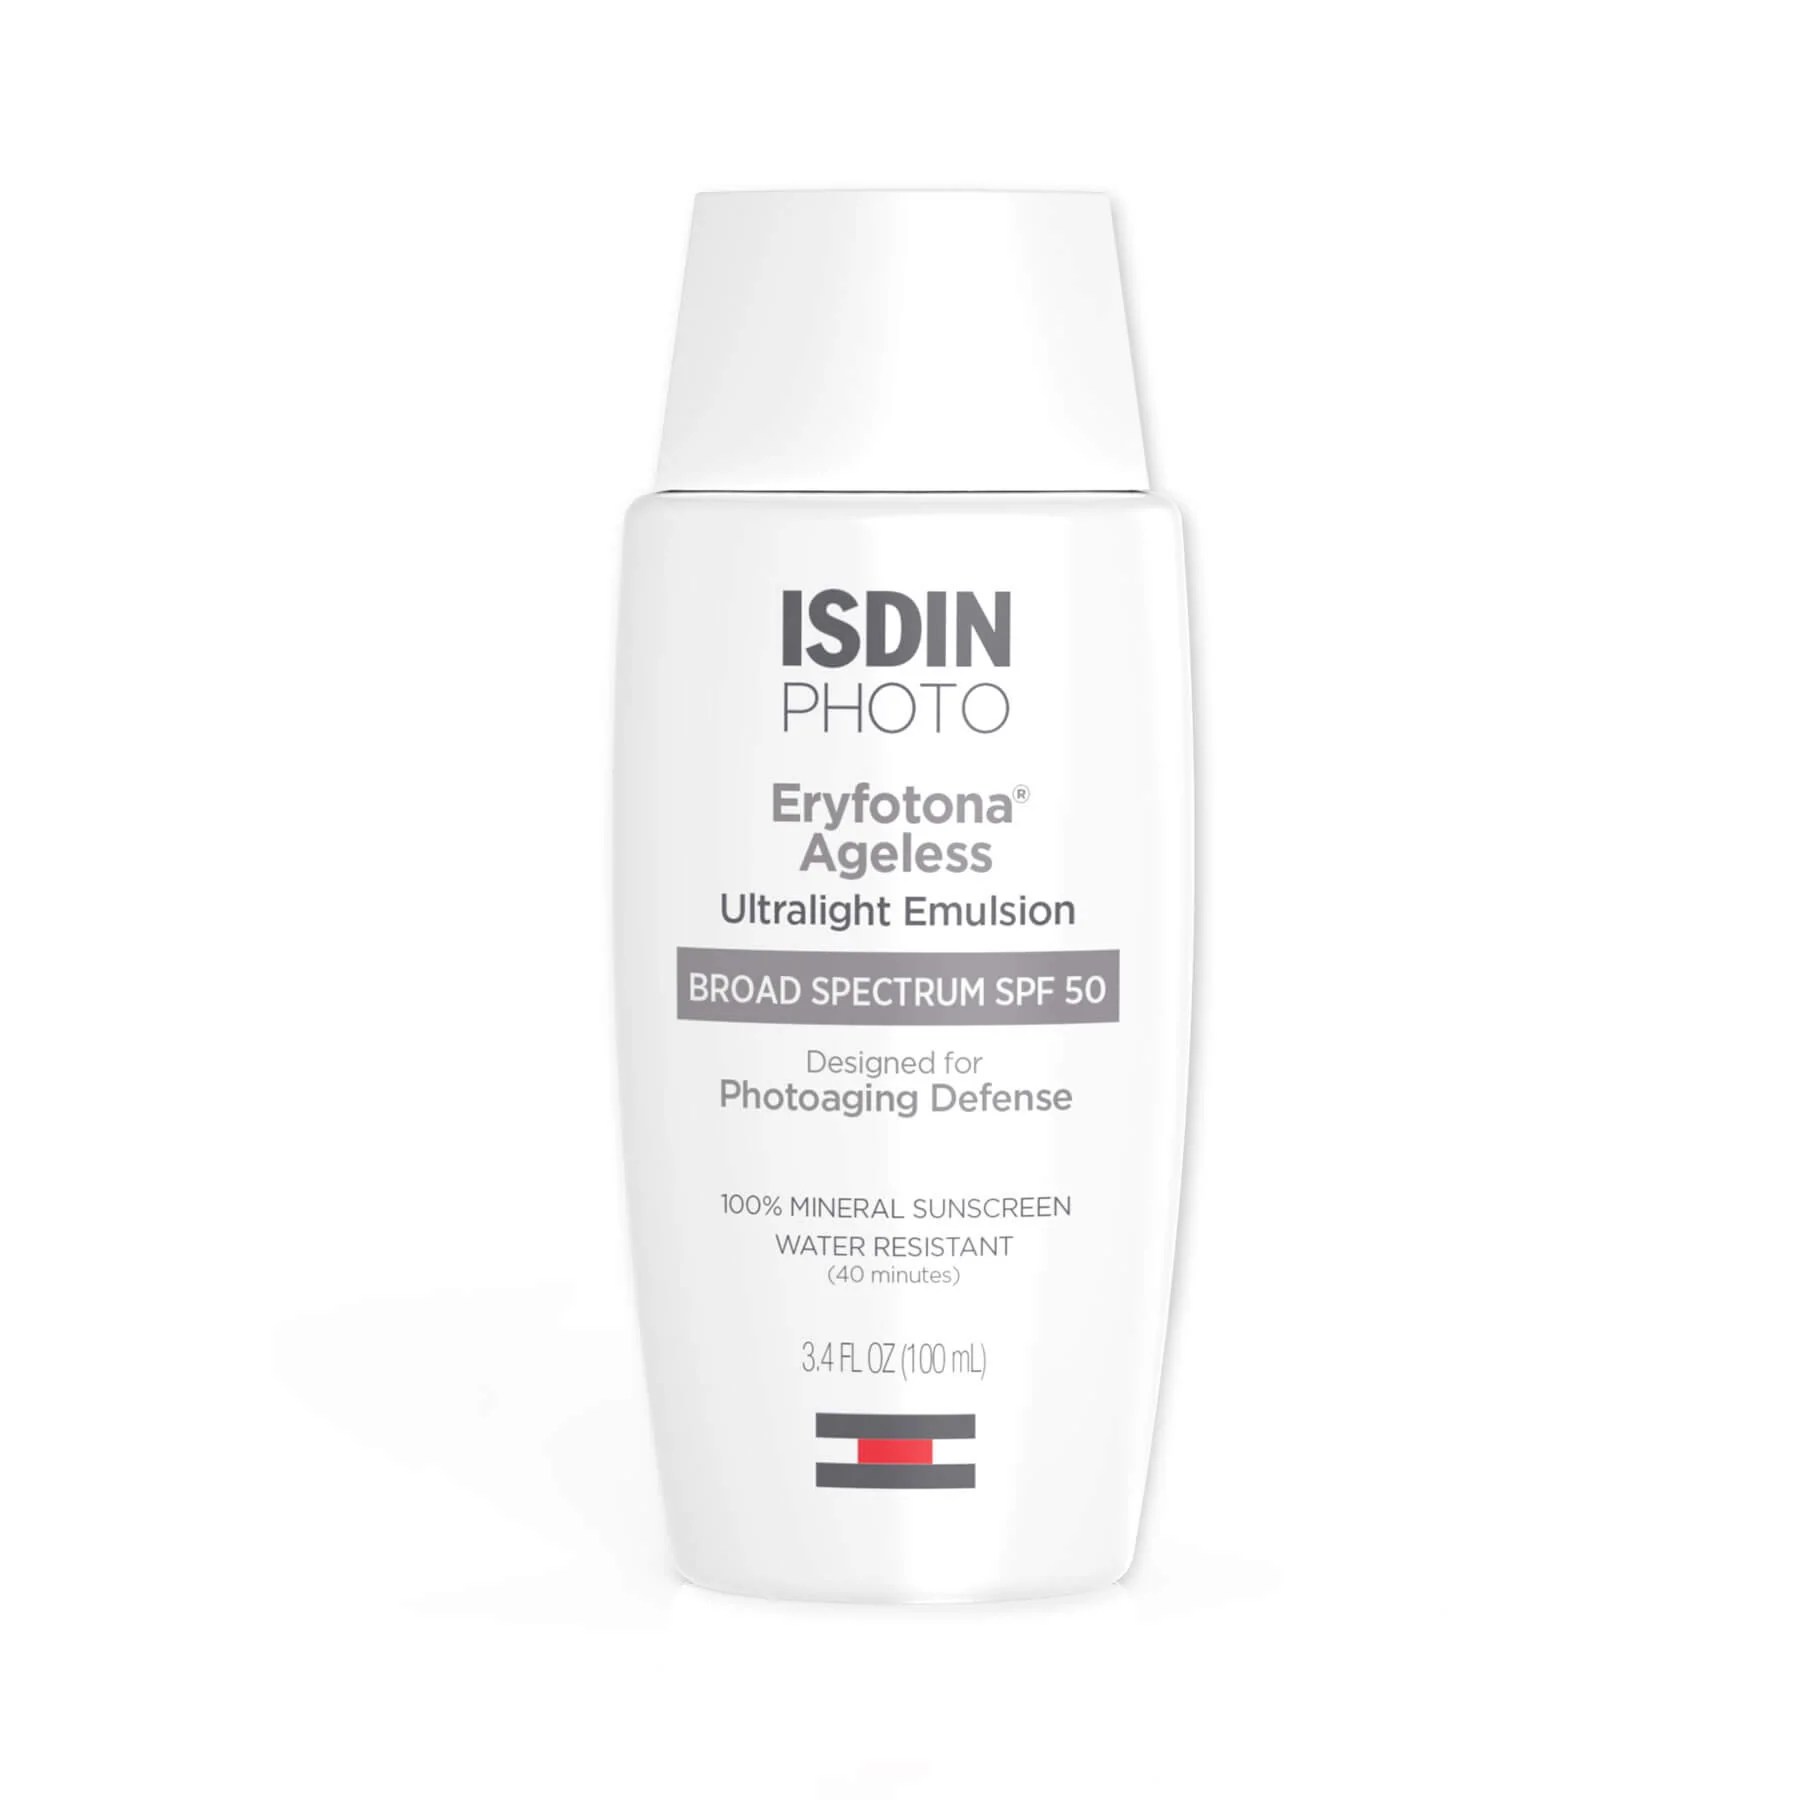 eryfotona ageless sunscreen from the isdin black friday sale on a white background